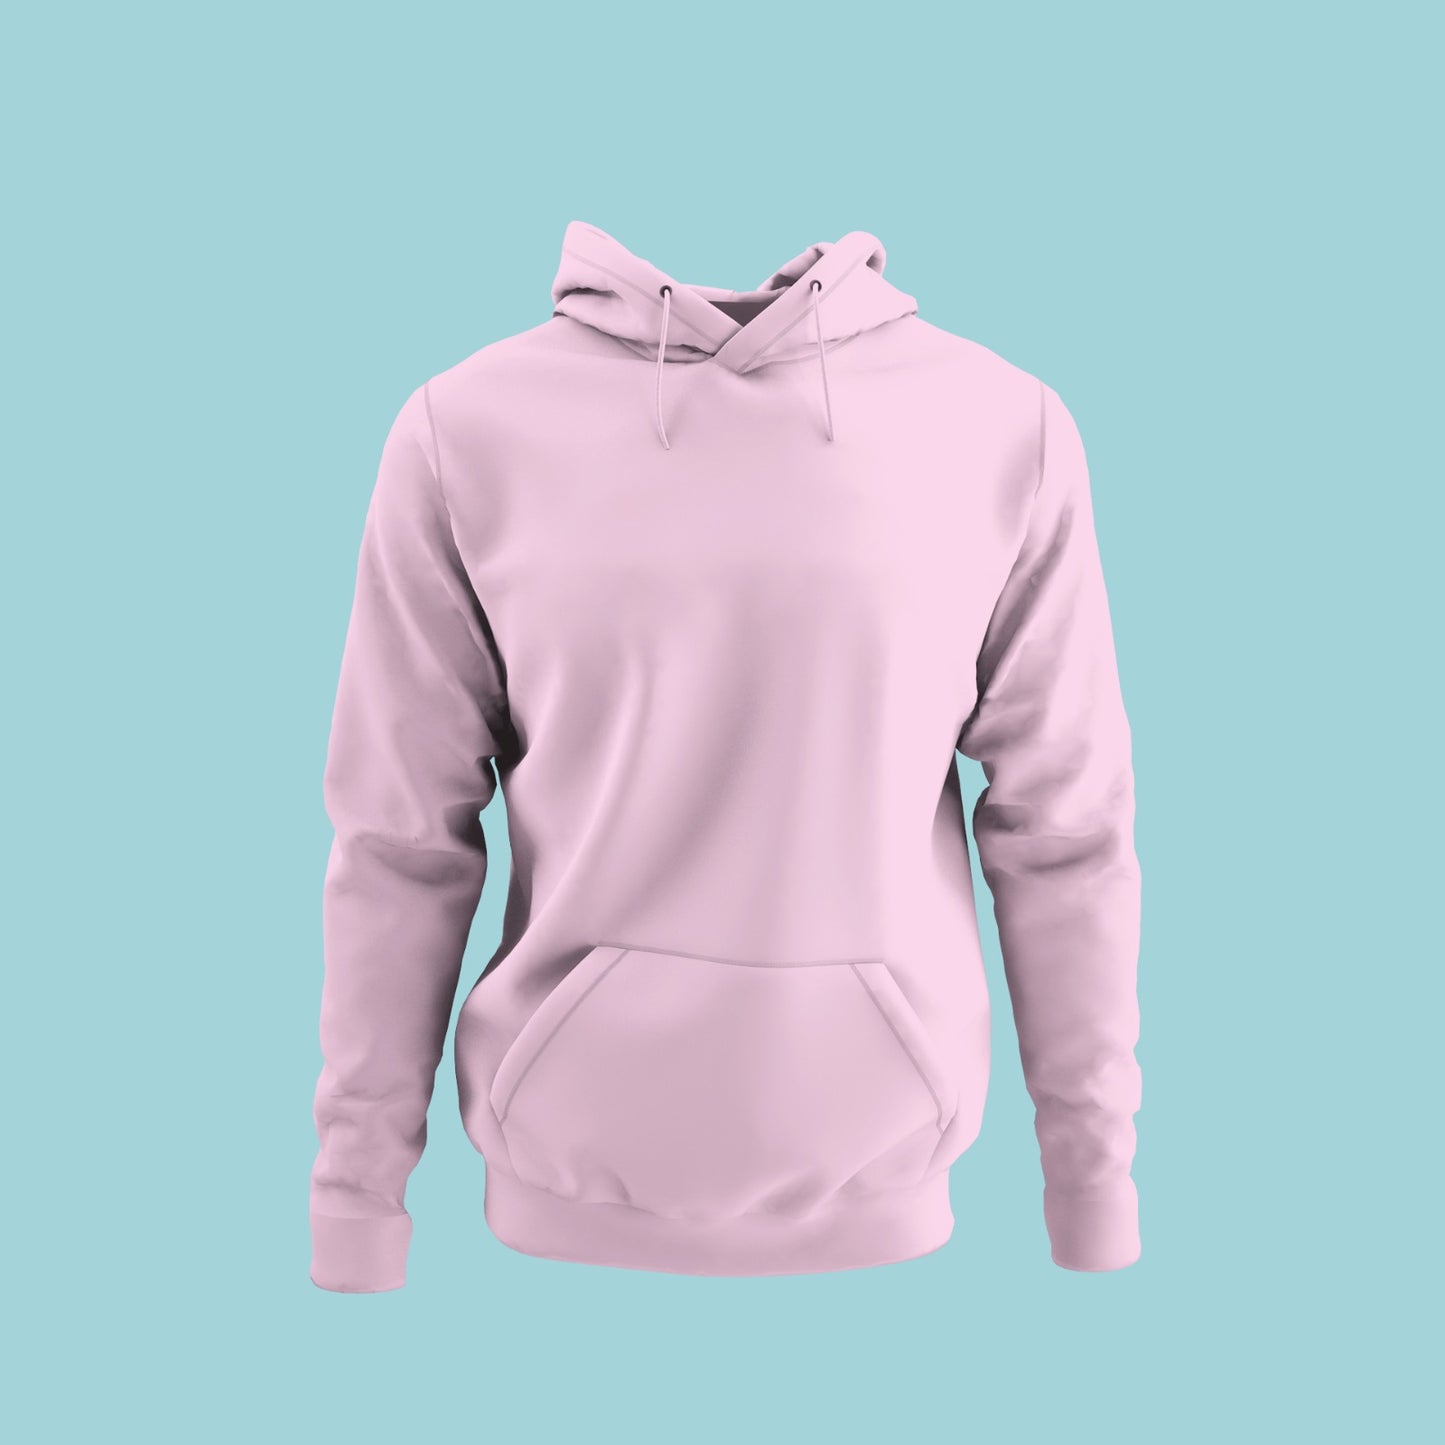 Make Your Own Hoodie!